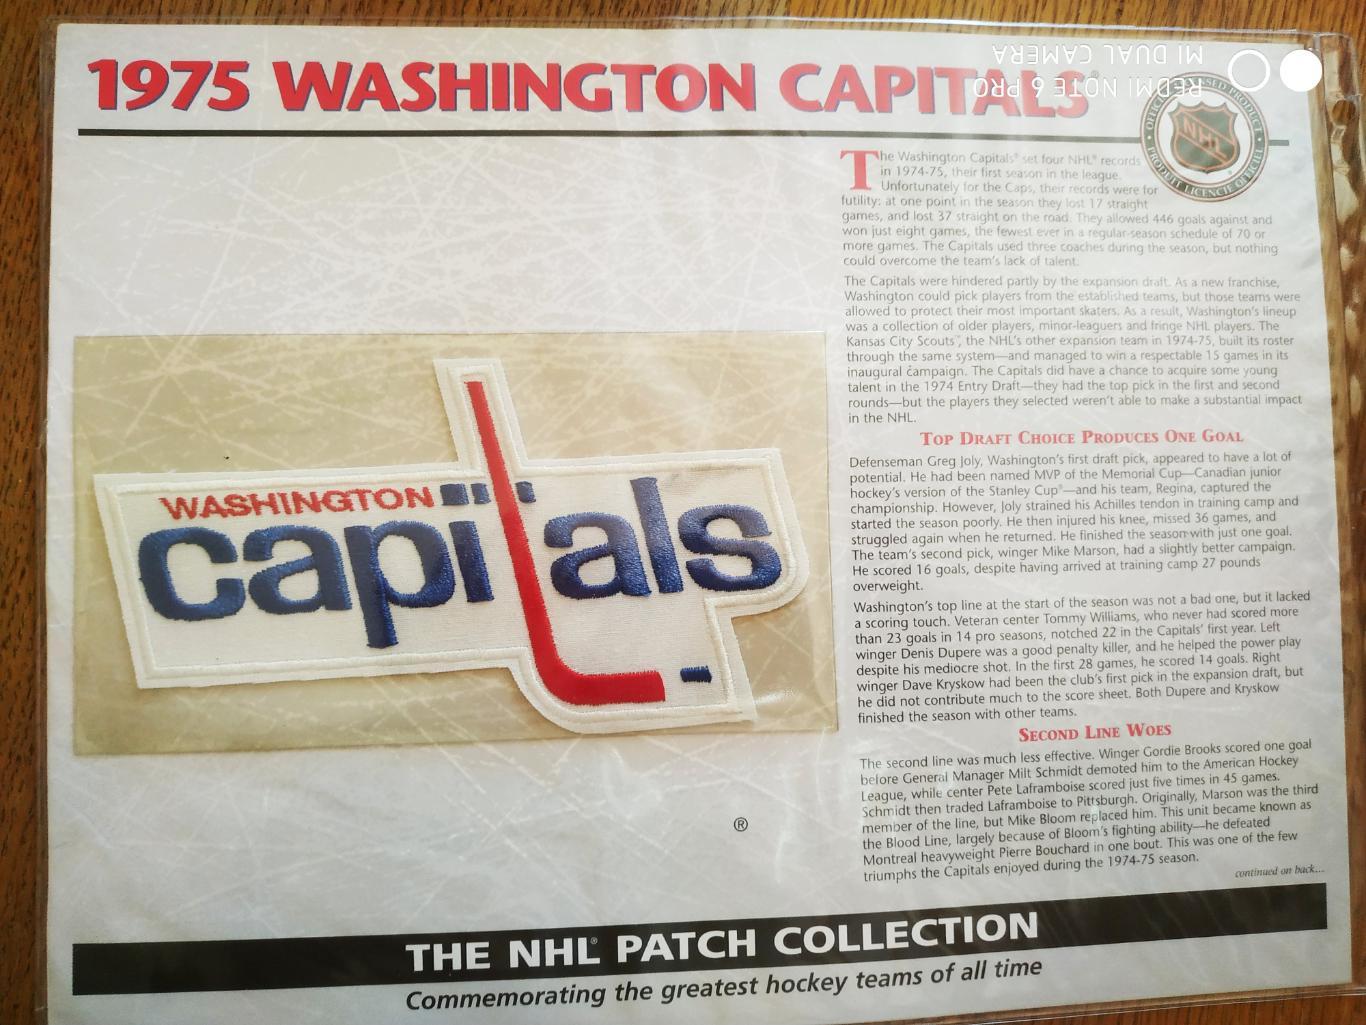 1975 WASHINGTON CAPITALS THE NHL PATCH COLLECTION WILLABEE WARD